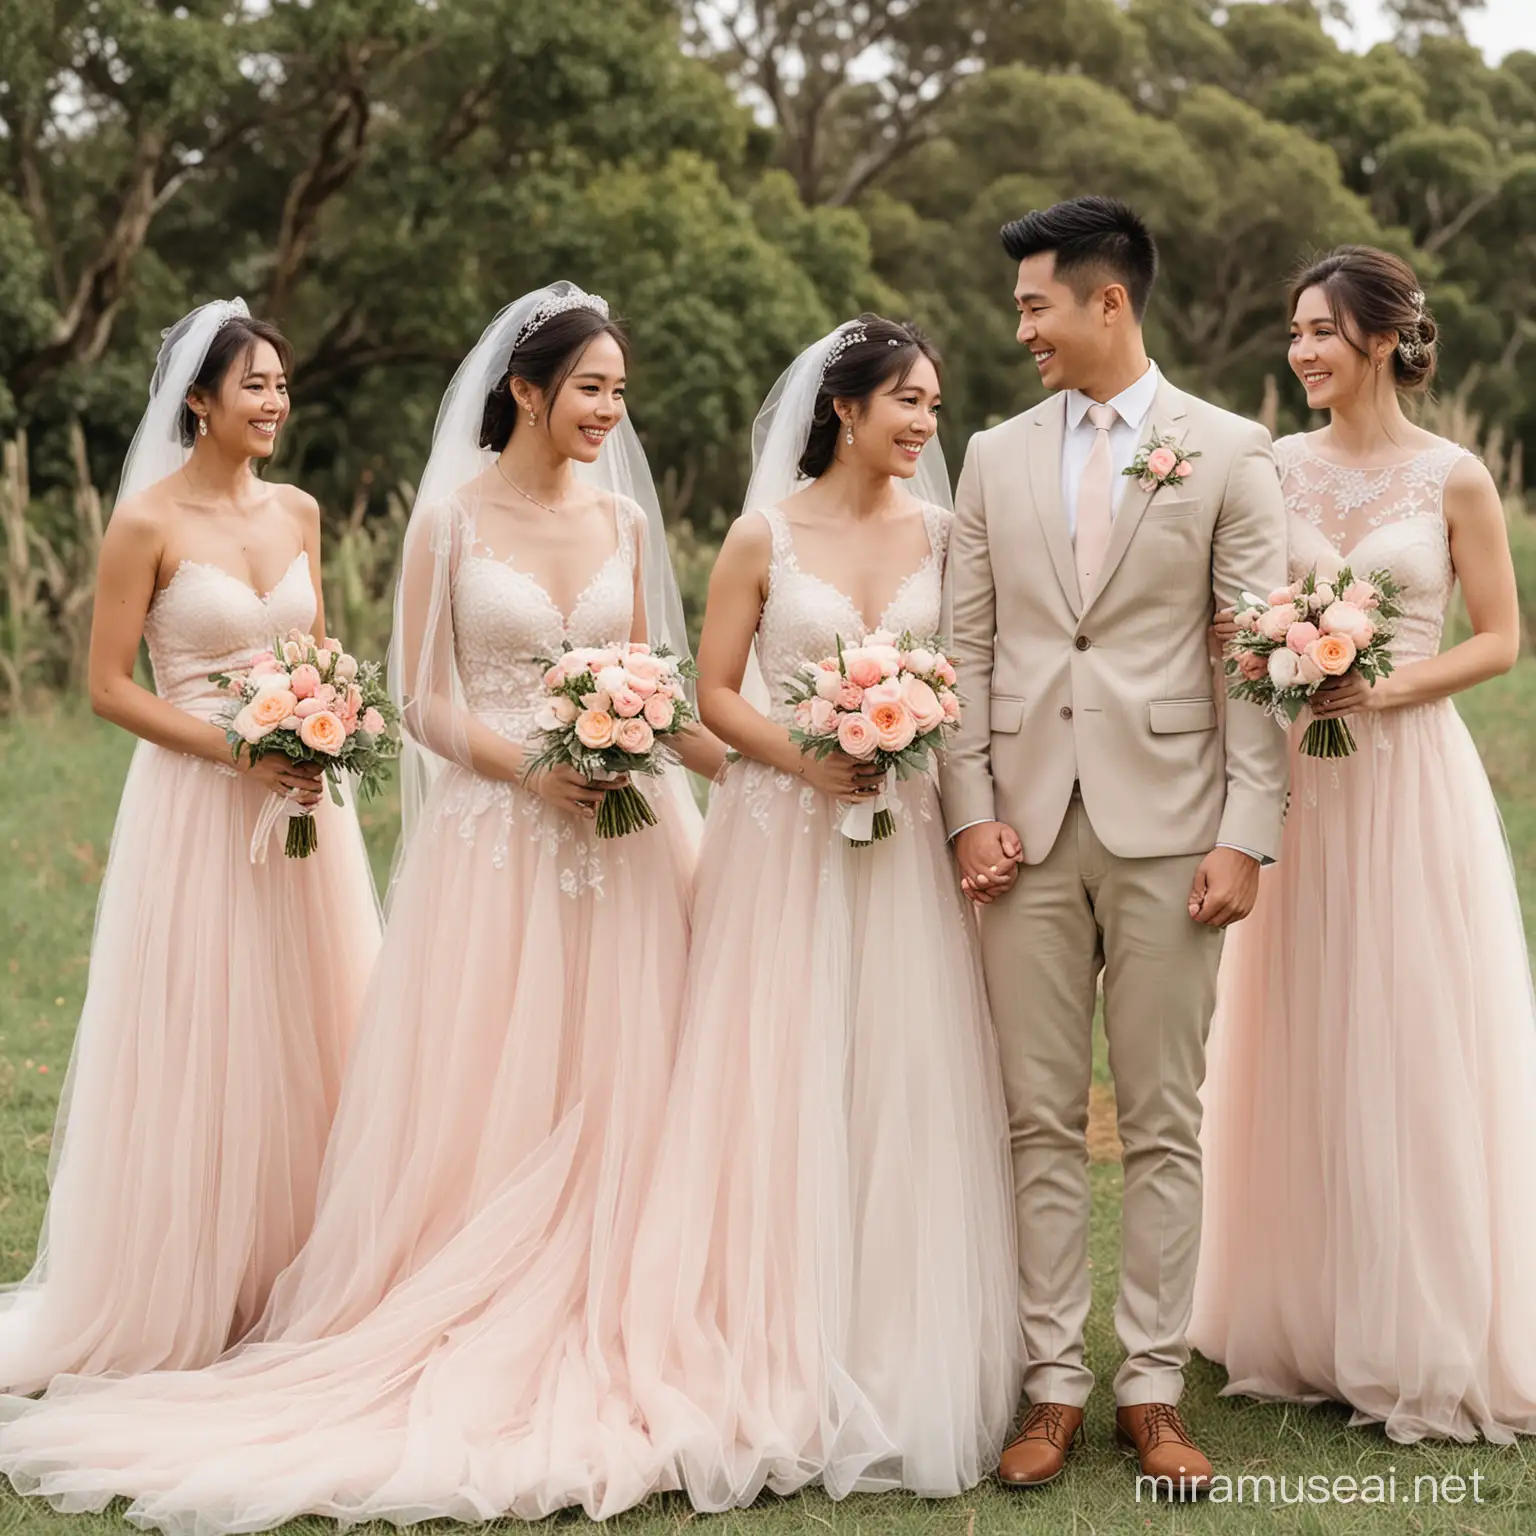 An Australian rustic farmhouse wedding, the theme is pastel watermelon pink and beige. The couple are Asian,  groom wears beige casual groom attire, the bride wears blush pink tulle wedding dress.